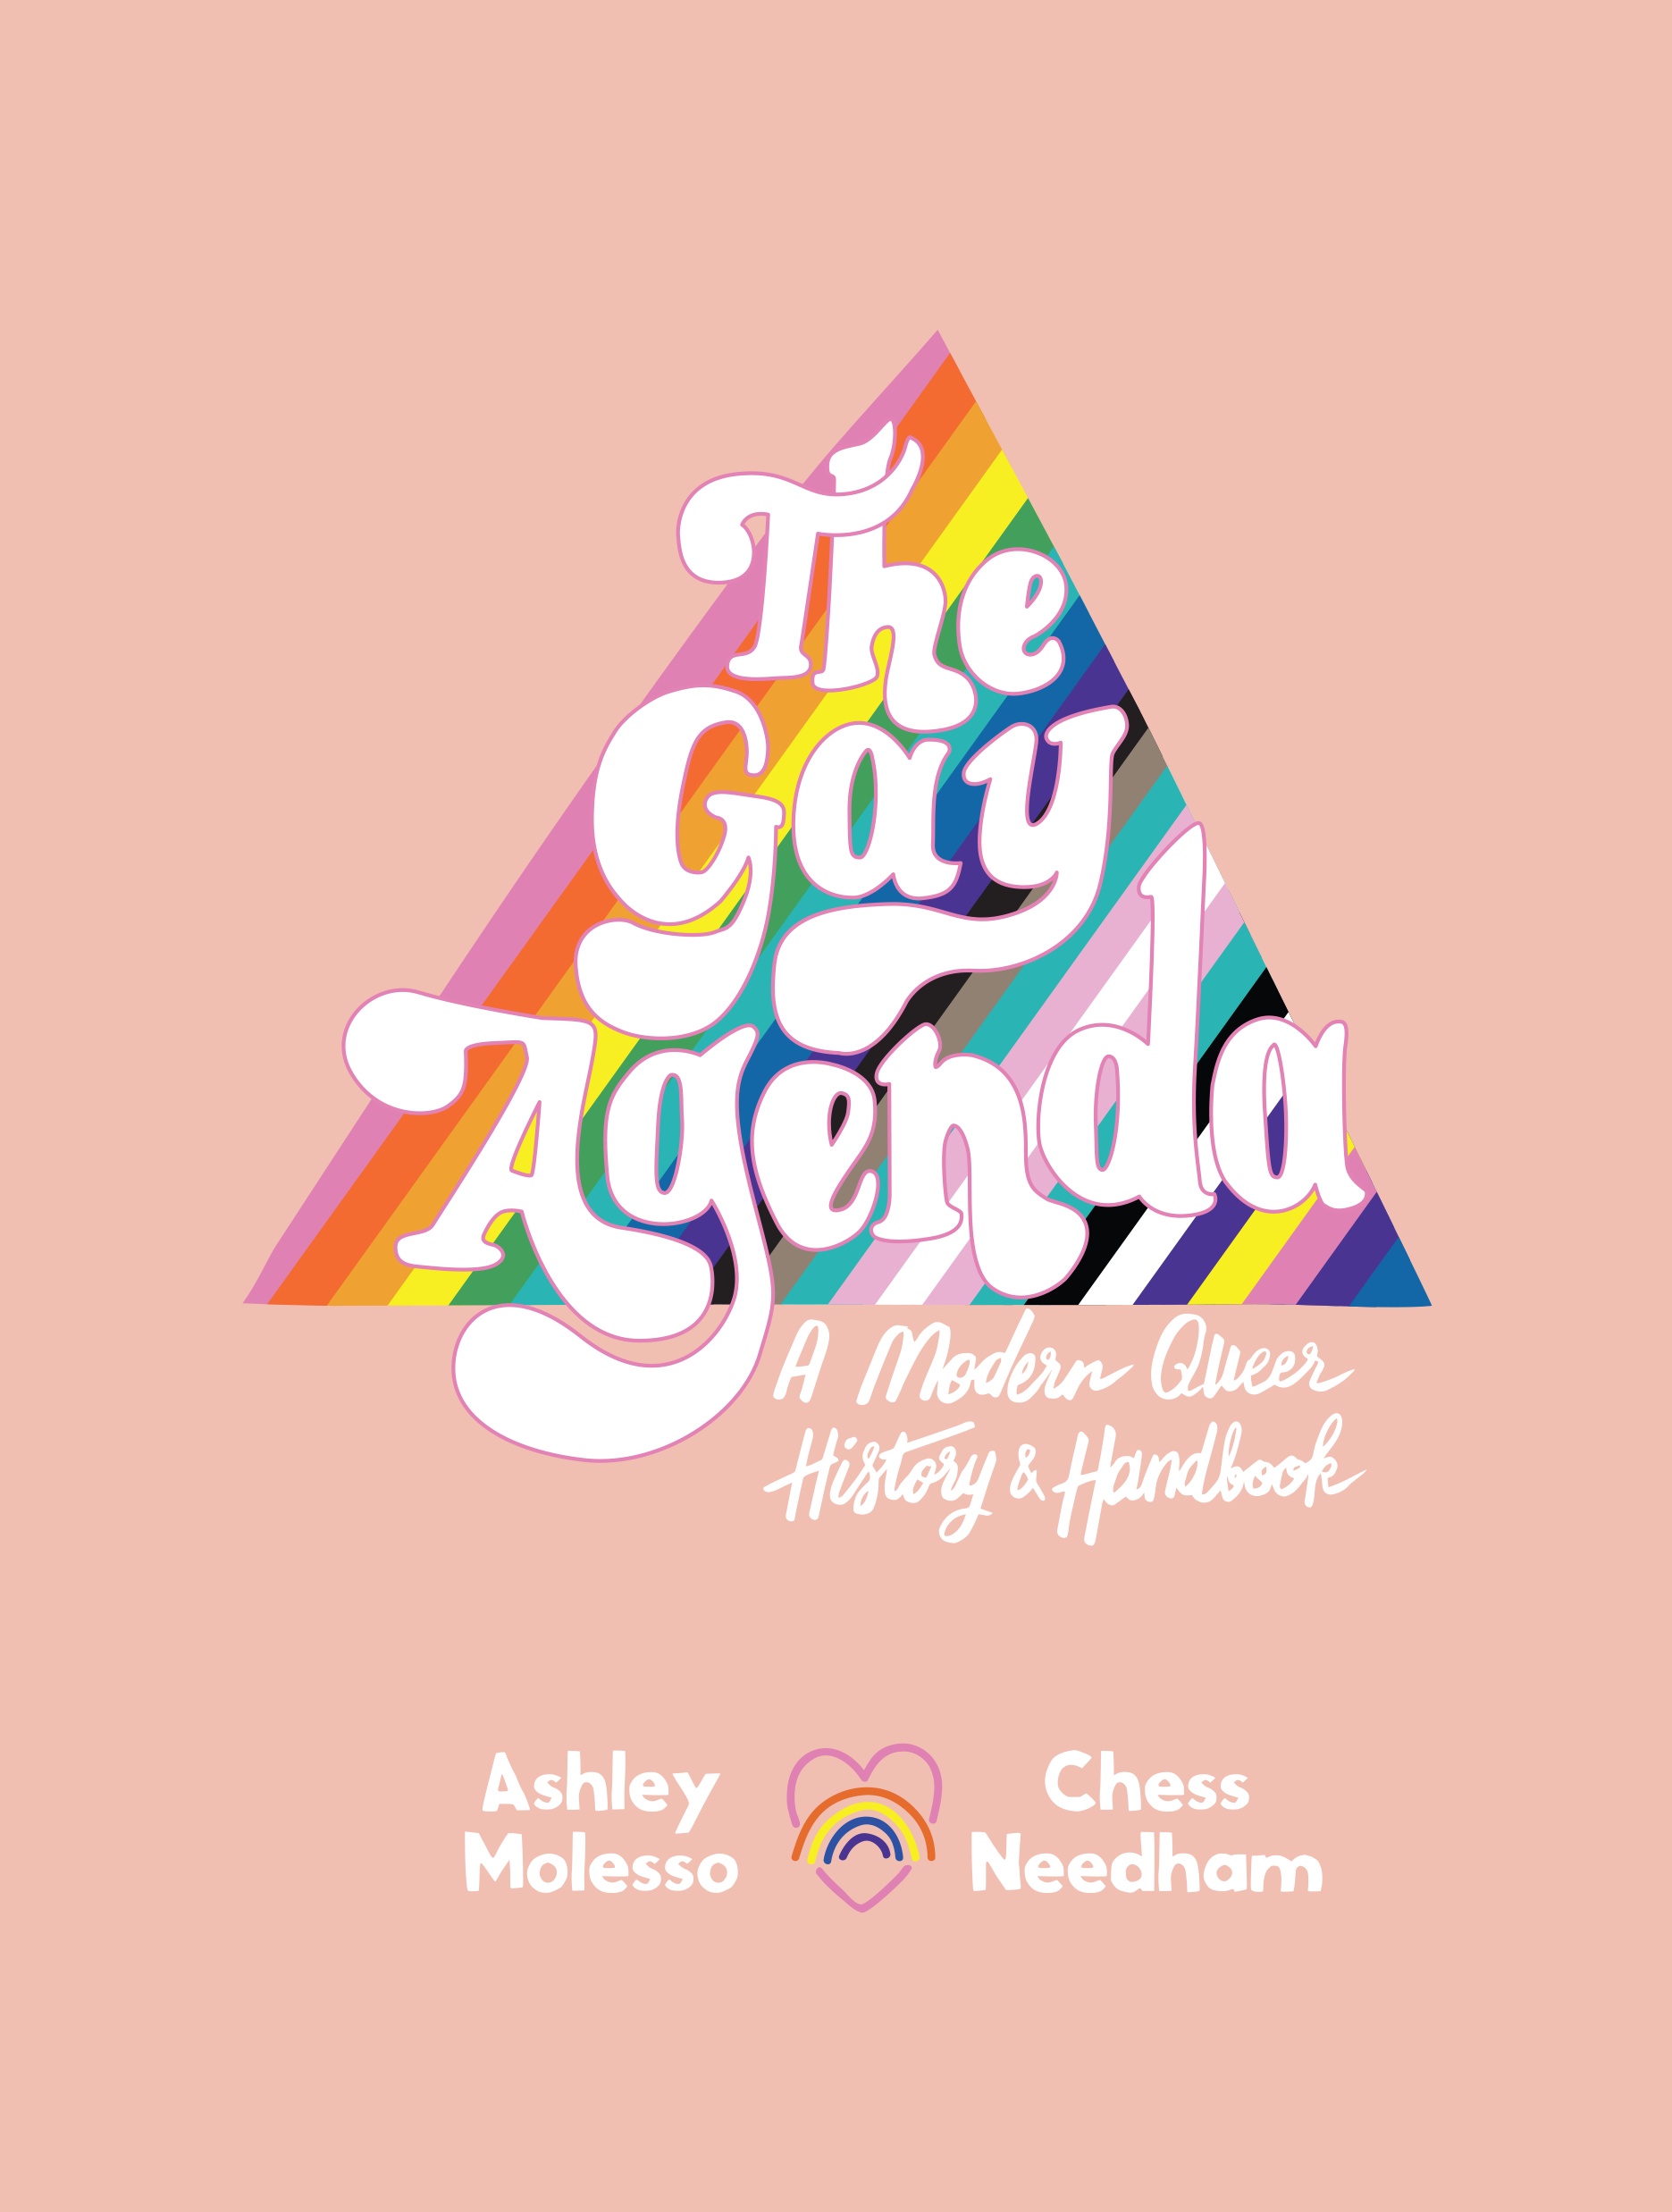 Book Launch: The Gay Agenda by Ash & Chess (POSTPONED)